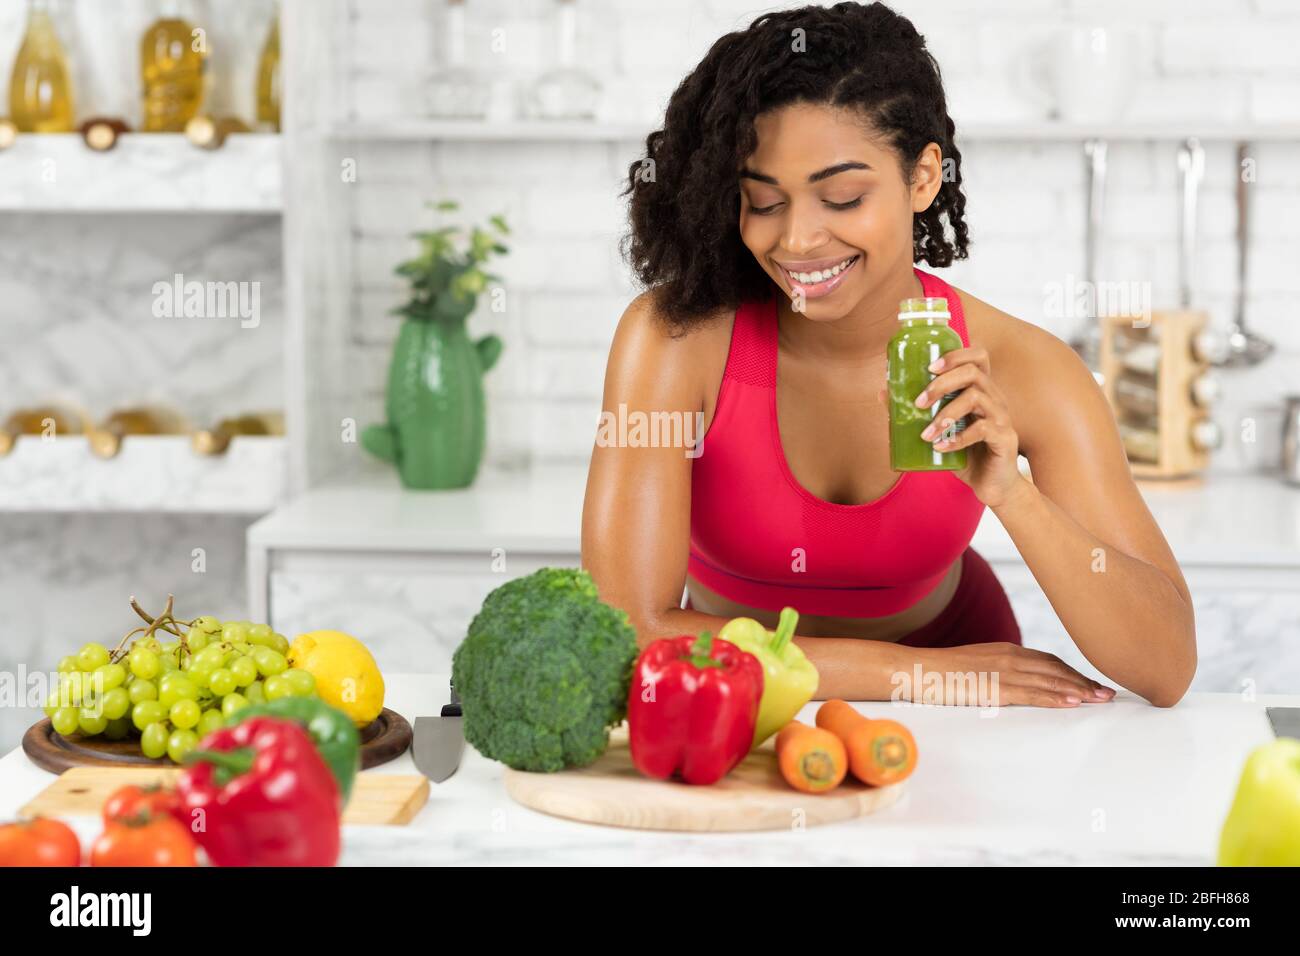 Fit Black Girl Drinking Delicious Detox Smoothie Stock Image